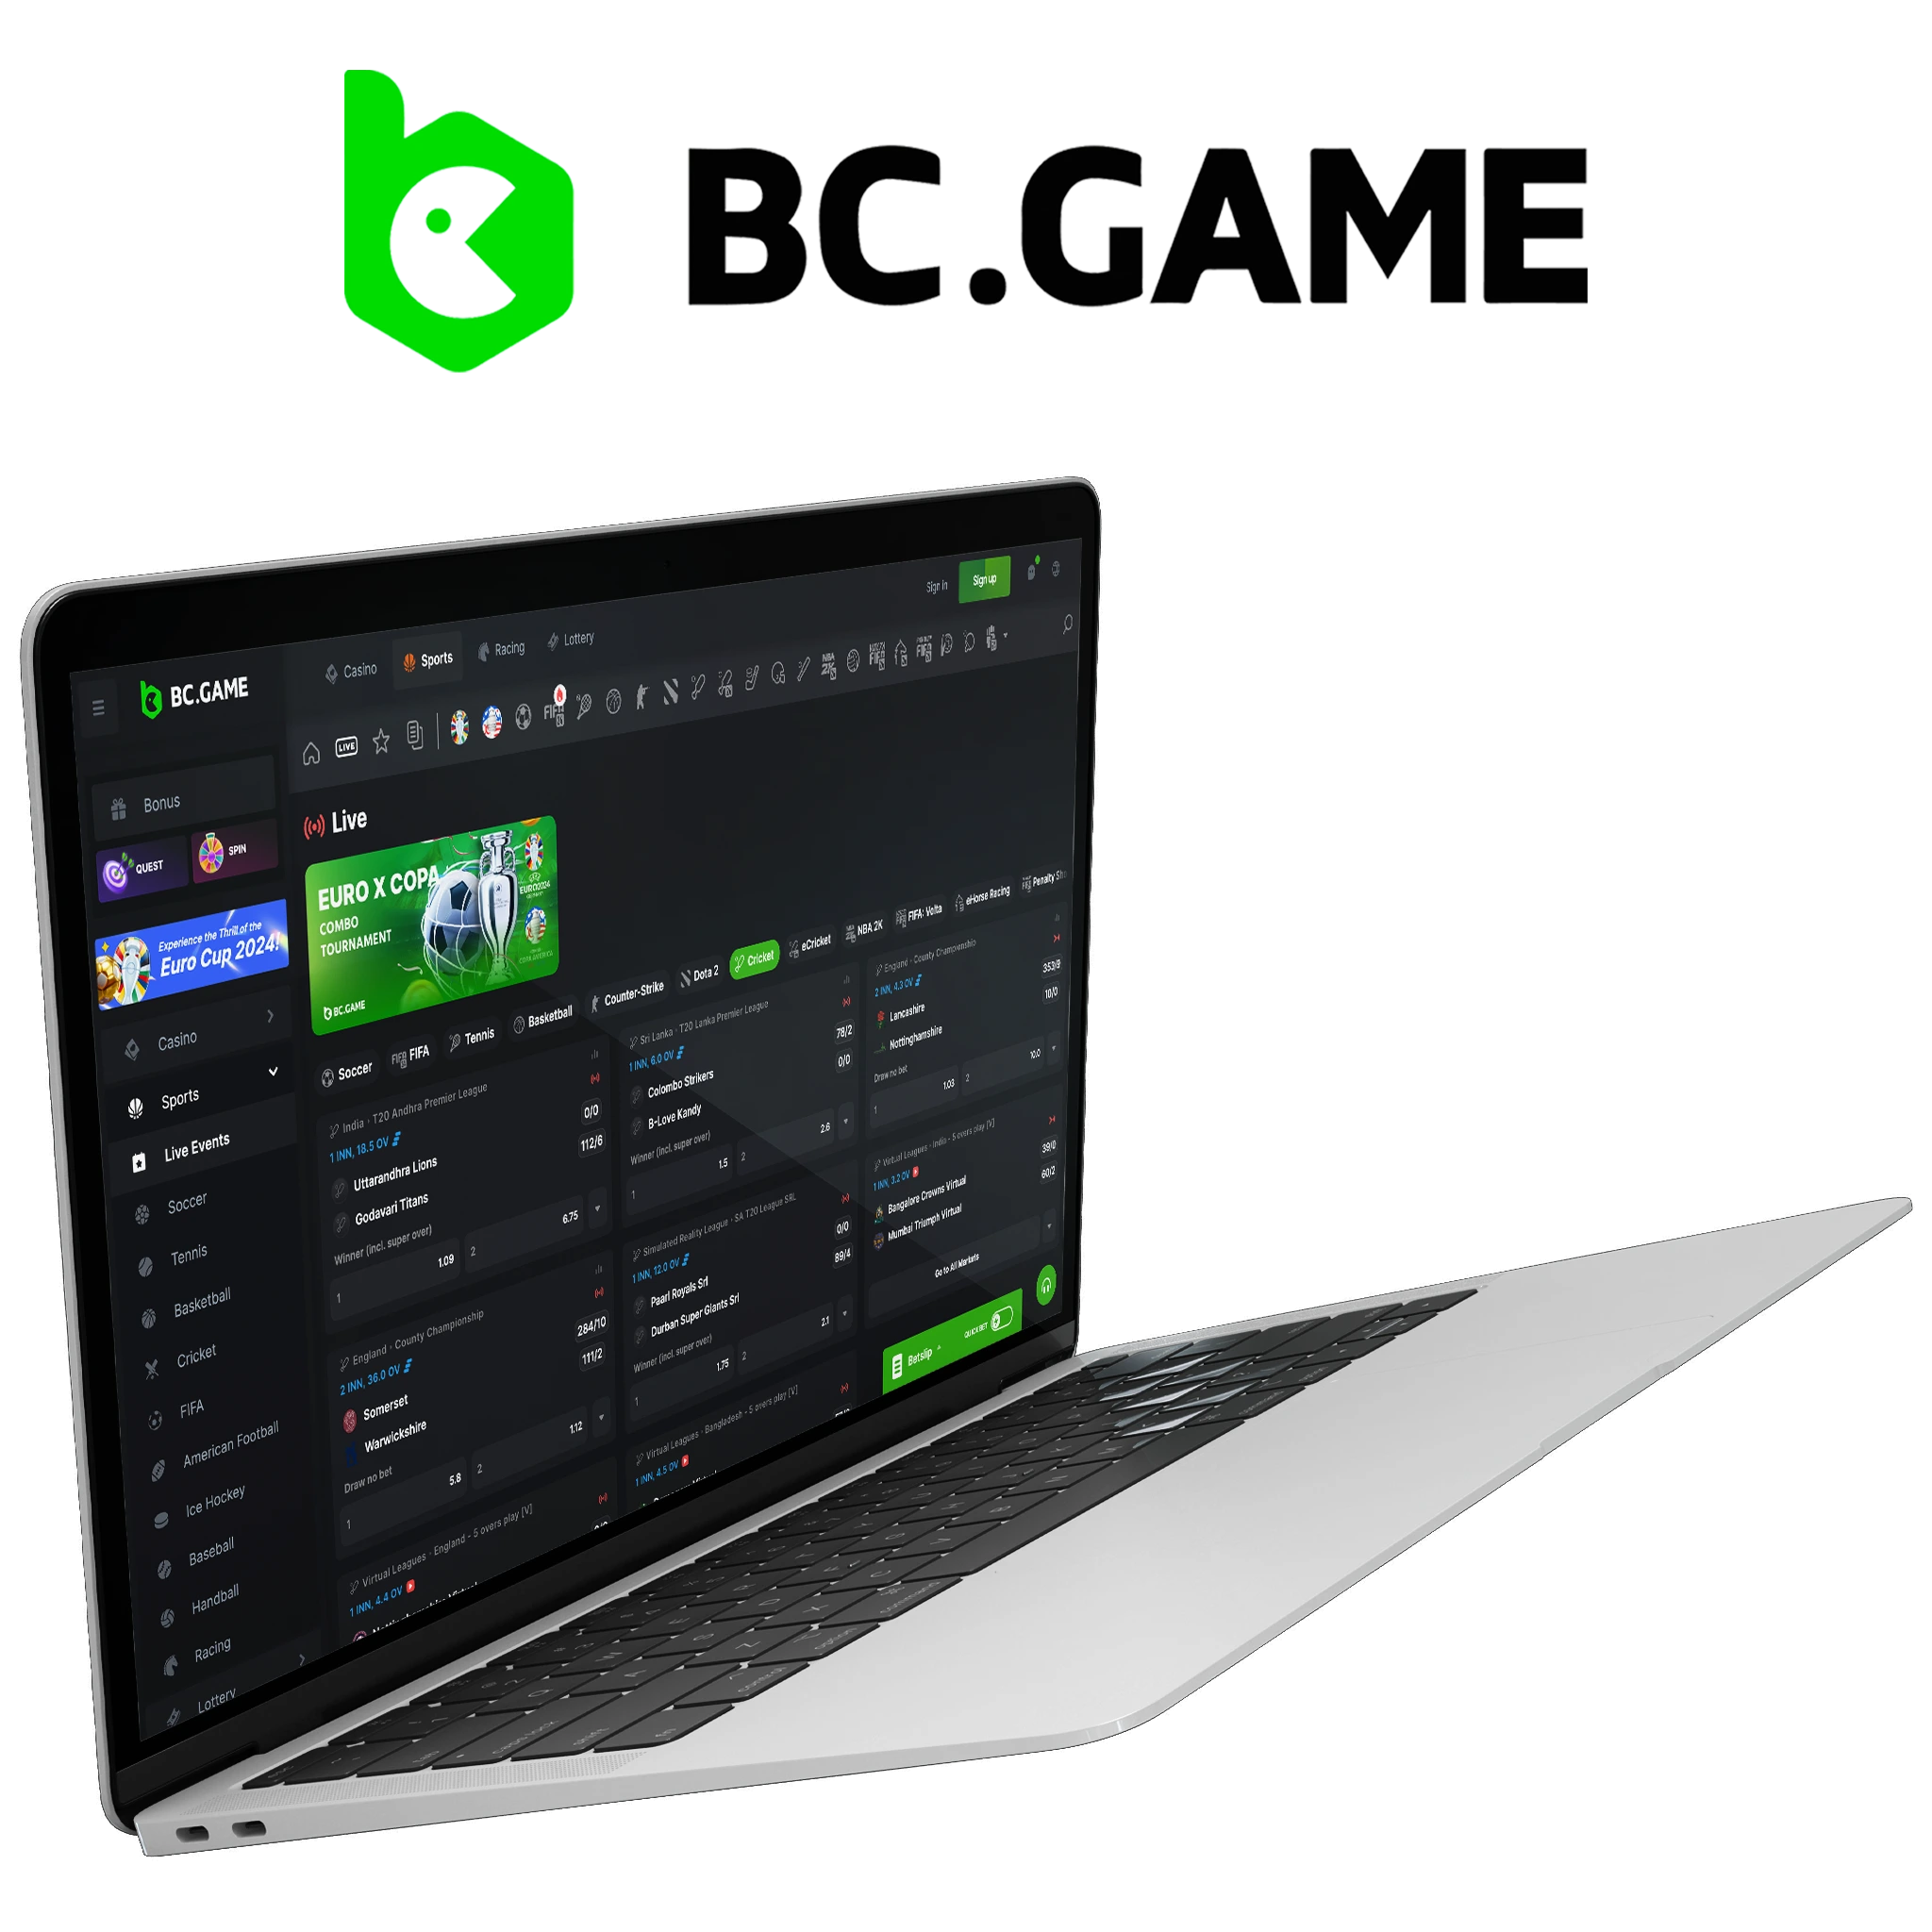 BC.Game is a cryptocurrency gaming platform that offers live betting directly while watching live streams.